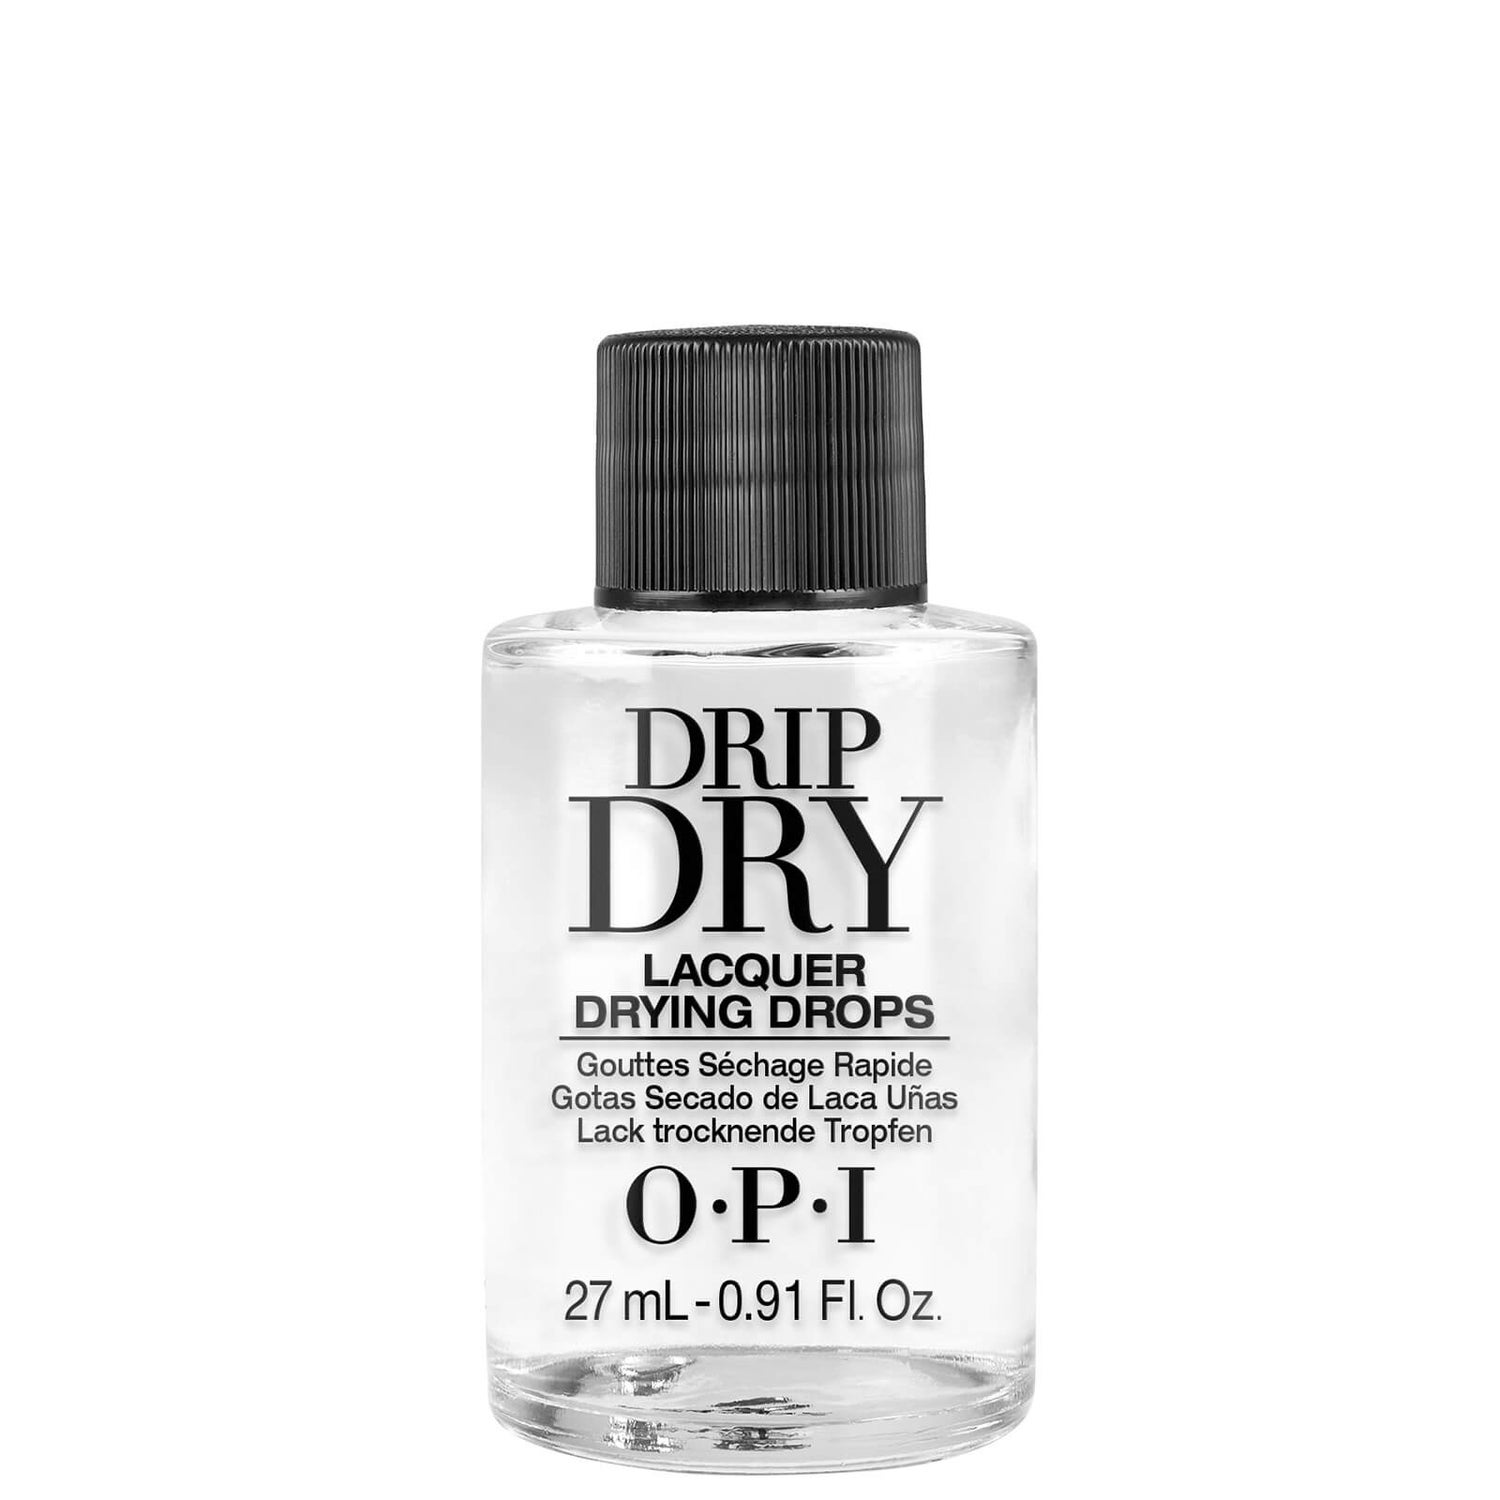 OPI Drip Dry Lacquer Drying Drops 1 fl. oz